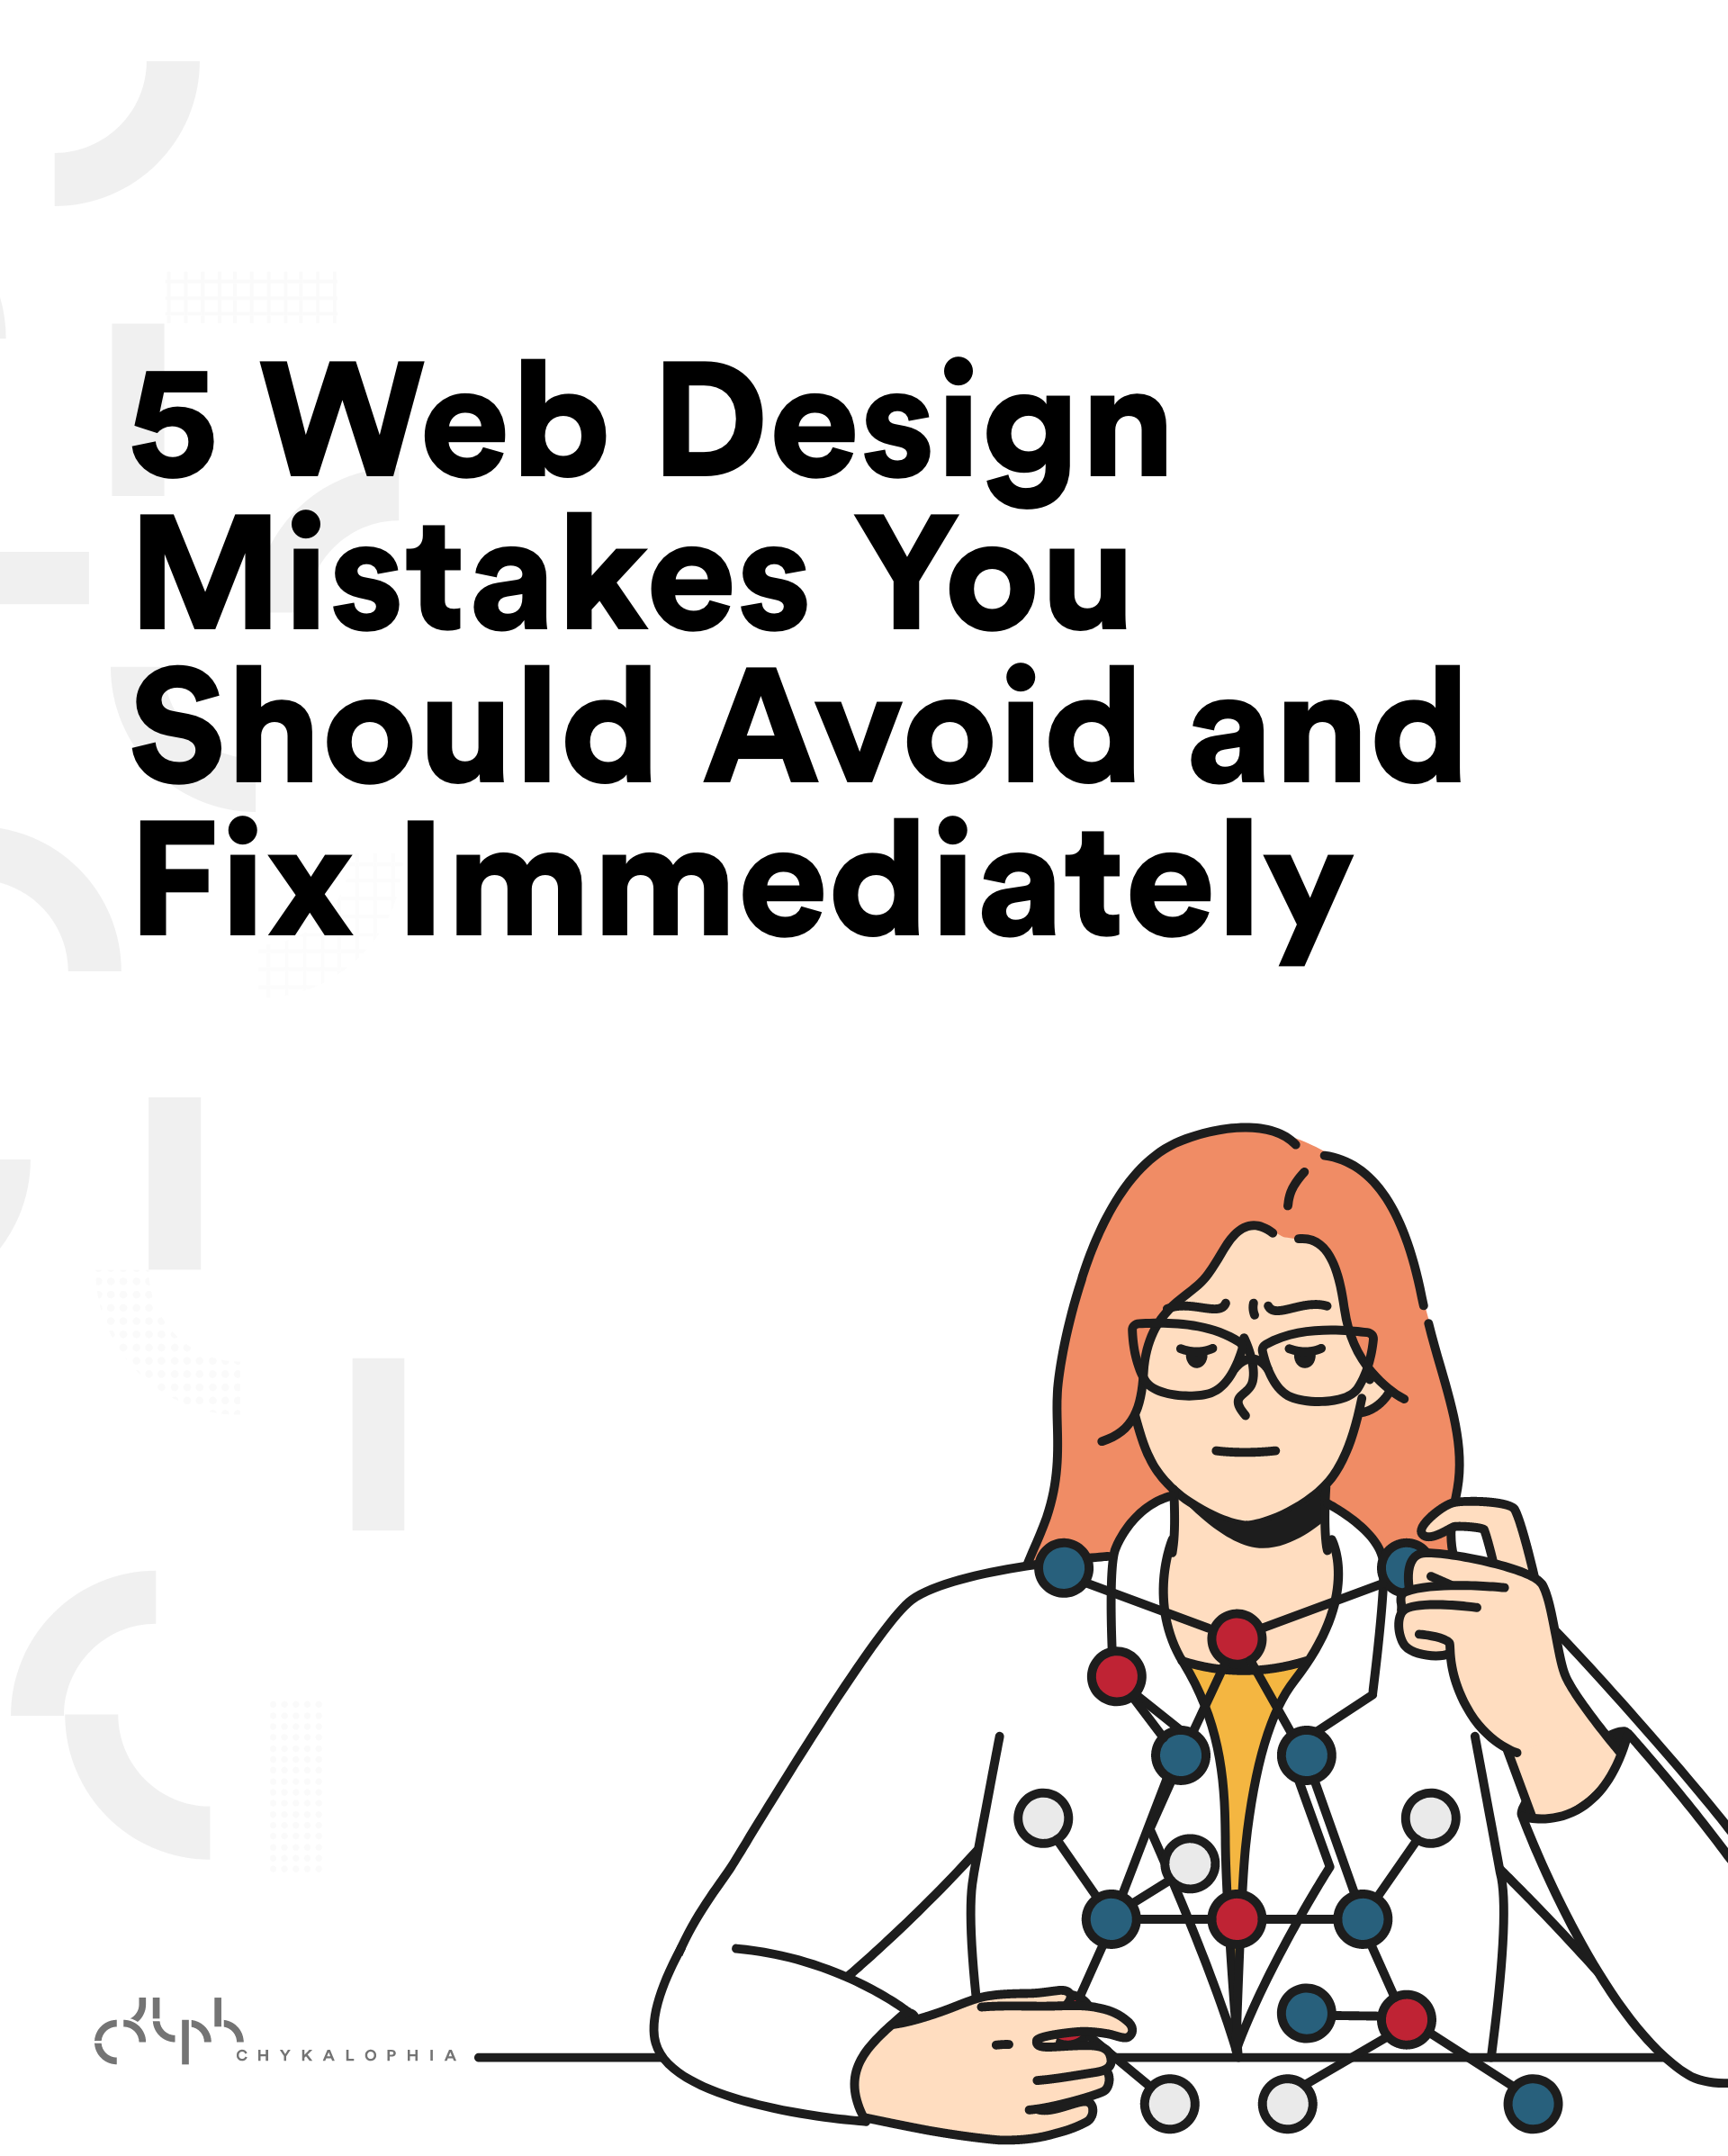 5 Web Design Mistakes You Should Avoid and Fix Immediately